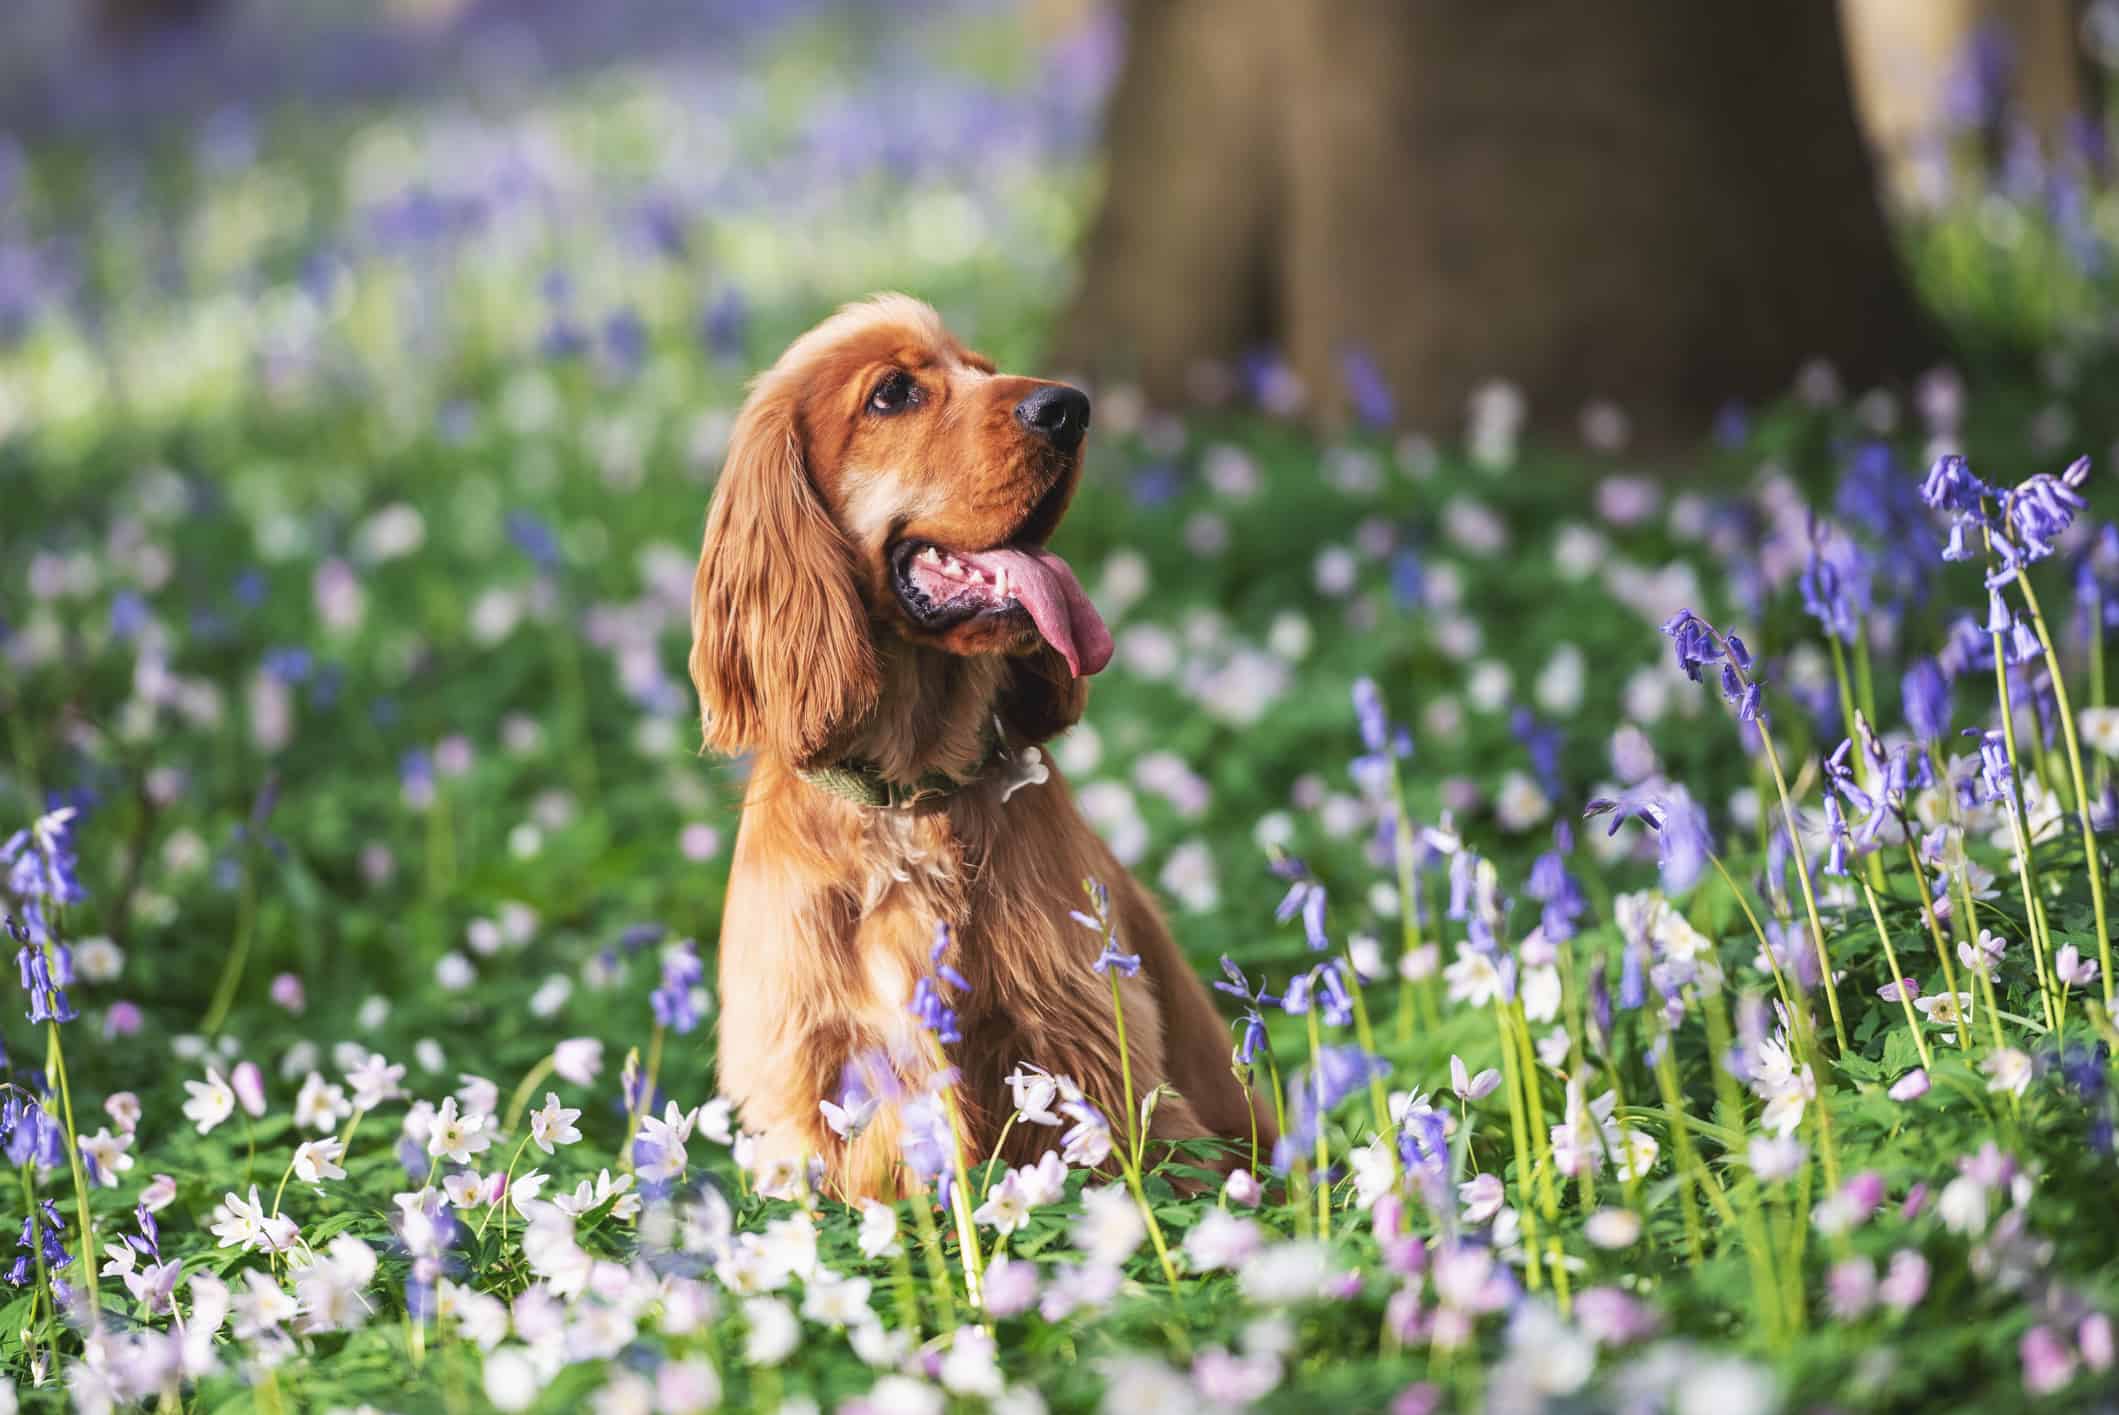 1 Year old cocker spaniel dog playing in the Bluebells in a Wooded area surrounded by trees in springtime